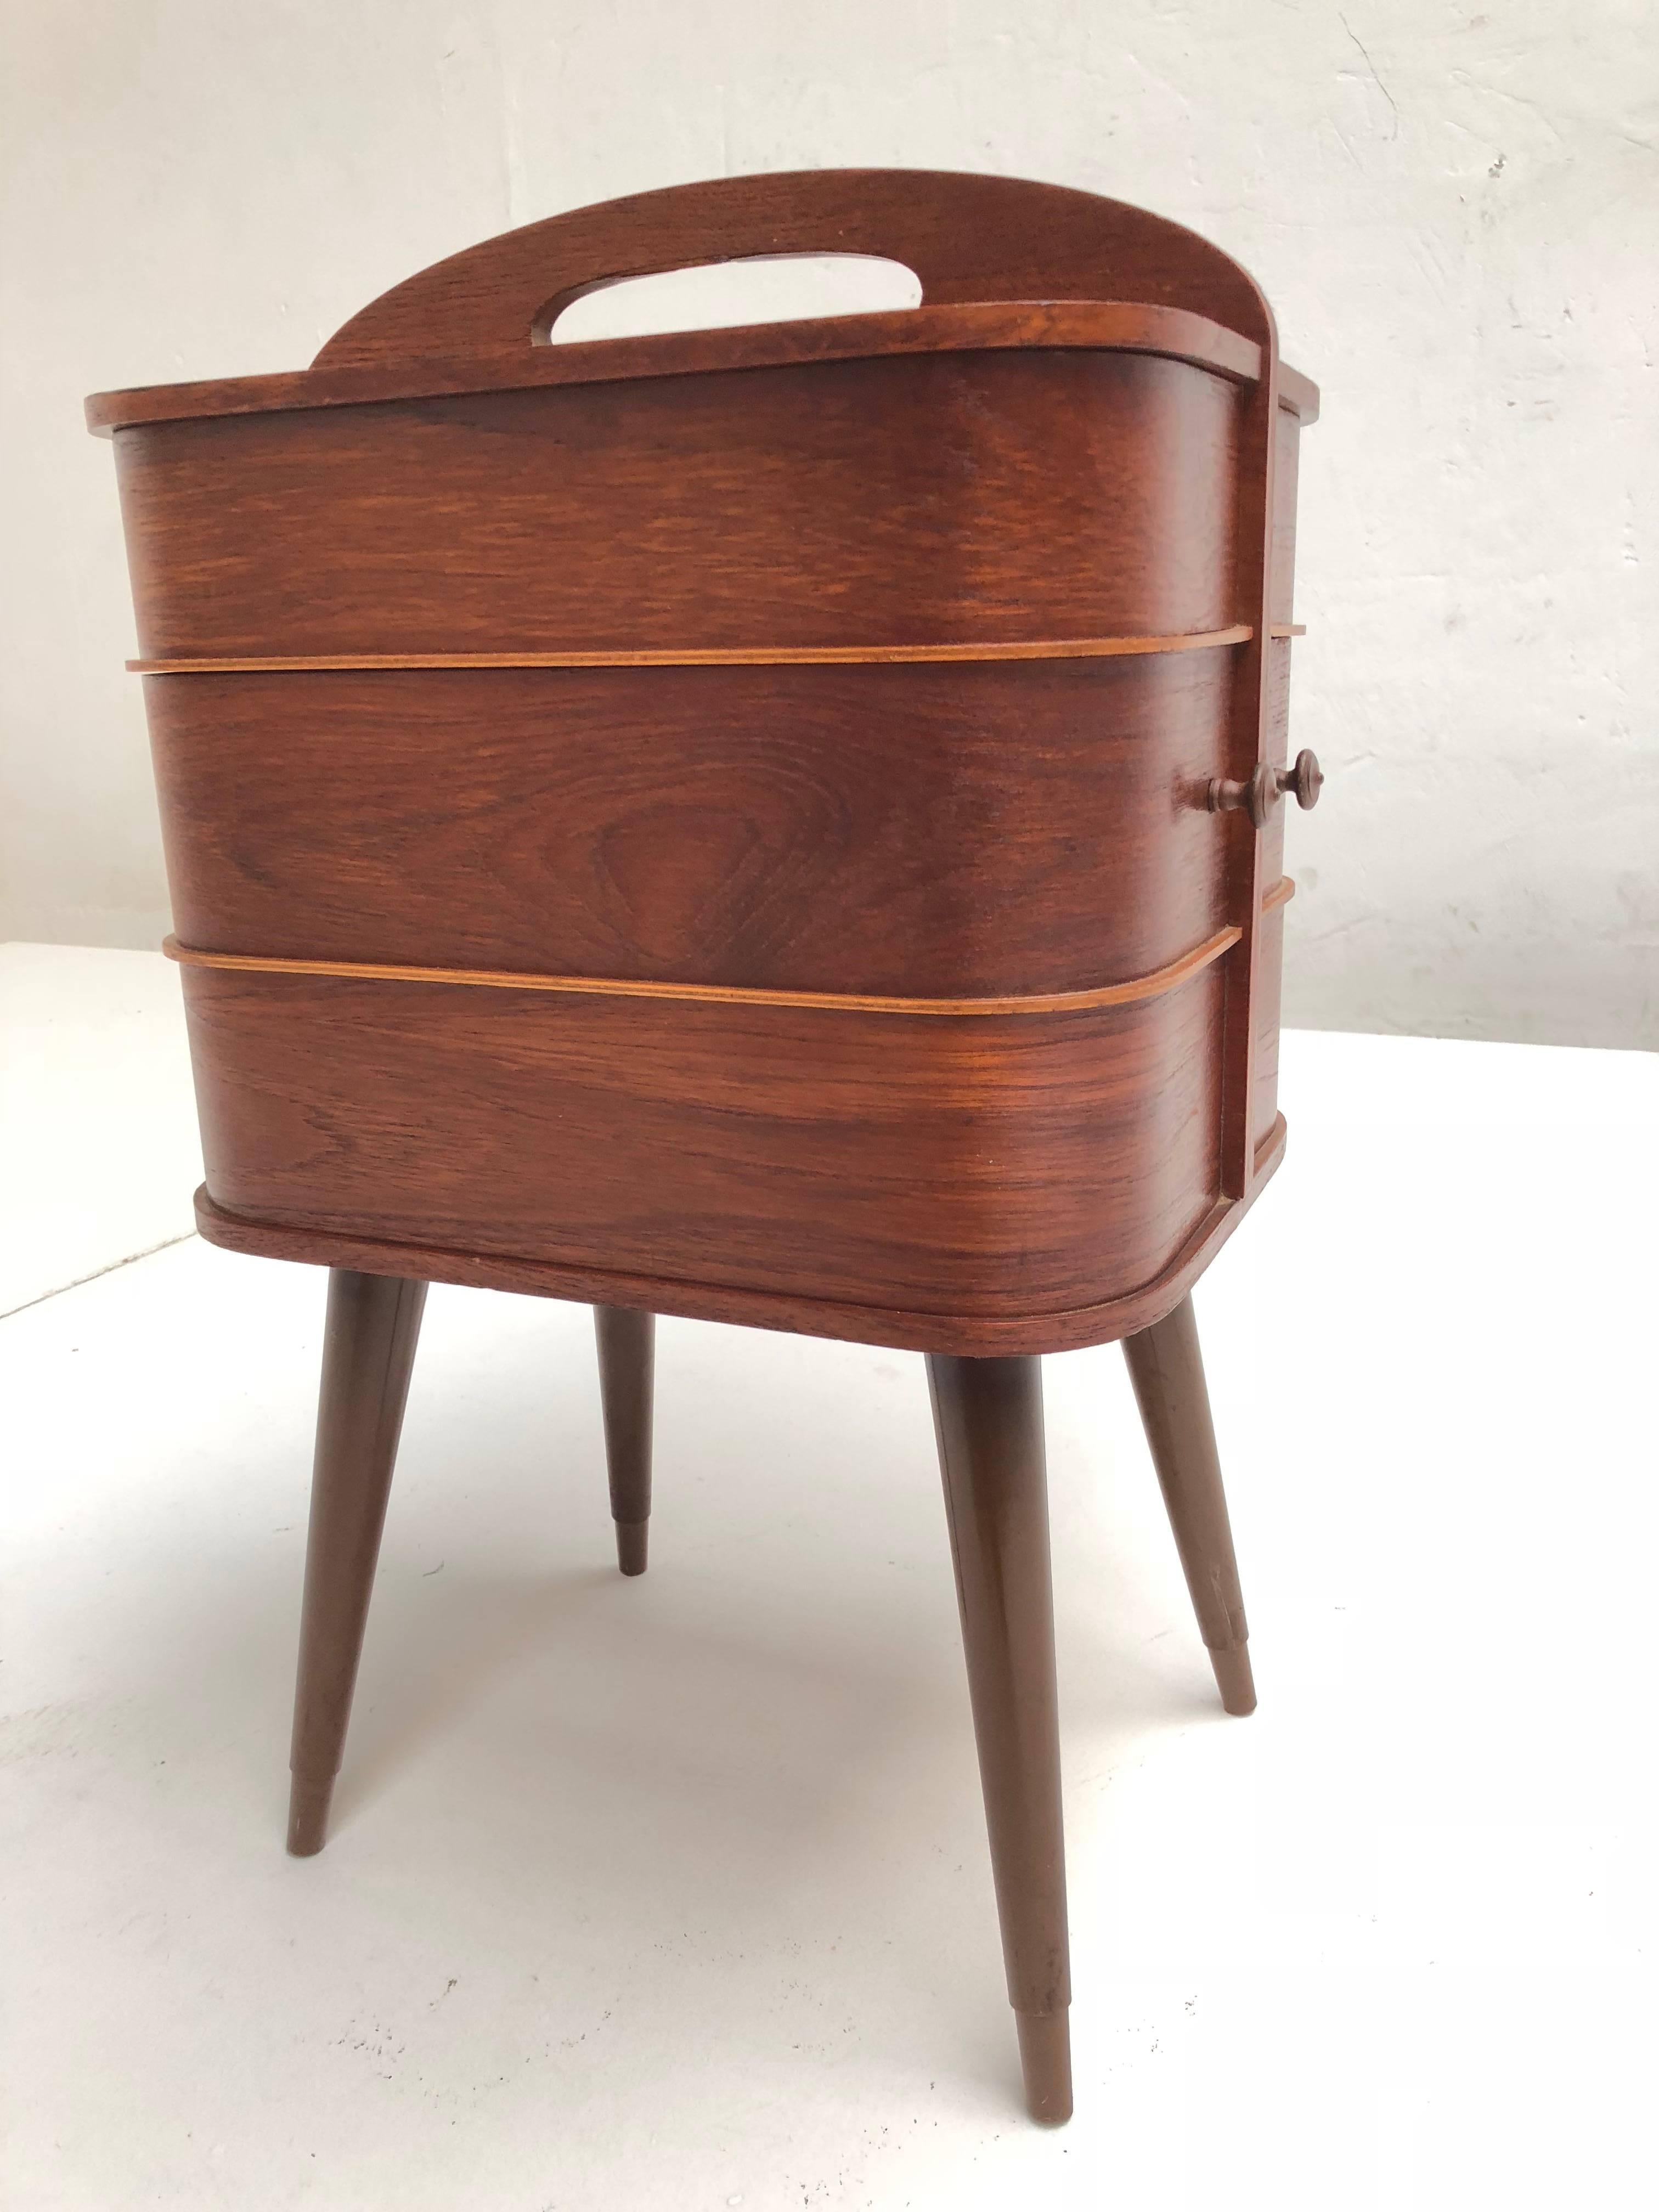 Danish Mid-Century Modern plywood sewing box with integrated handle and revolving drawers

This Teak finished plywood sewing box was imported and distributed in The Netherlands by UMS Pastoe that sold design by Cees Braakman, Arne Jacobsen and